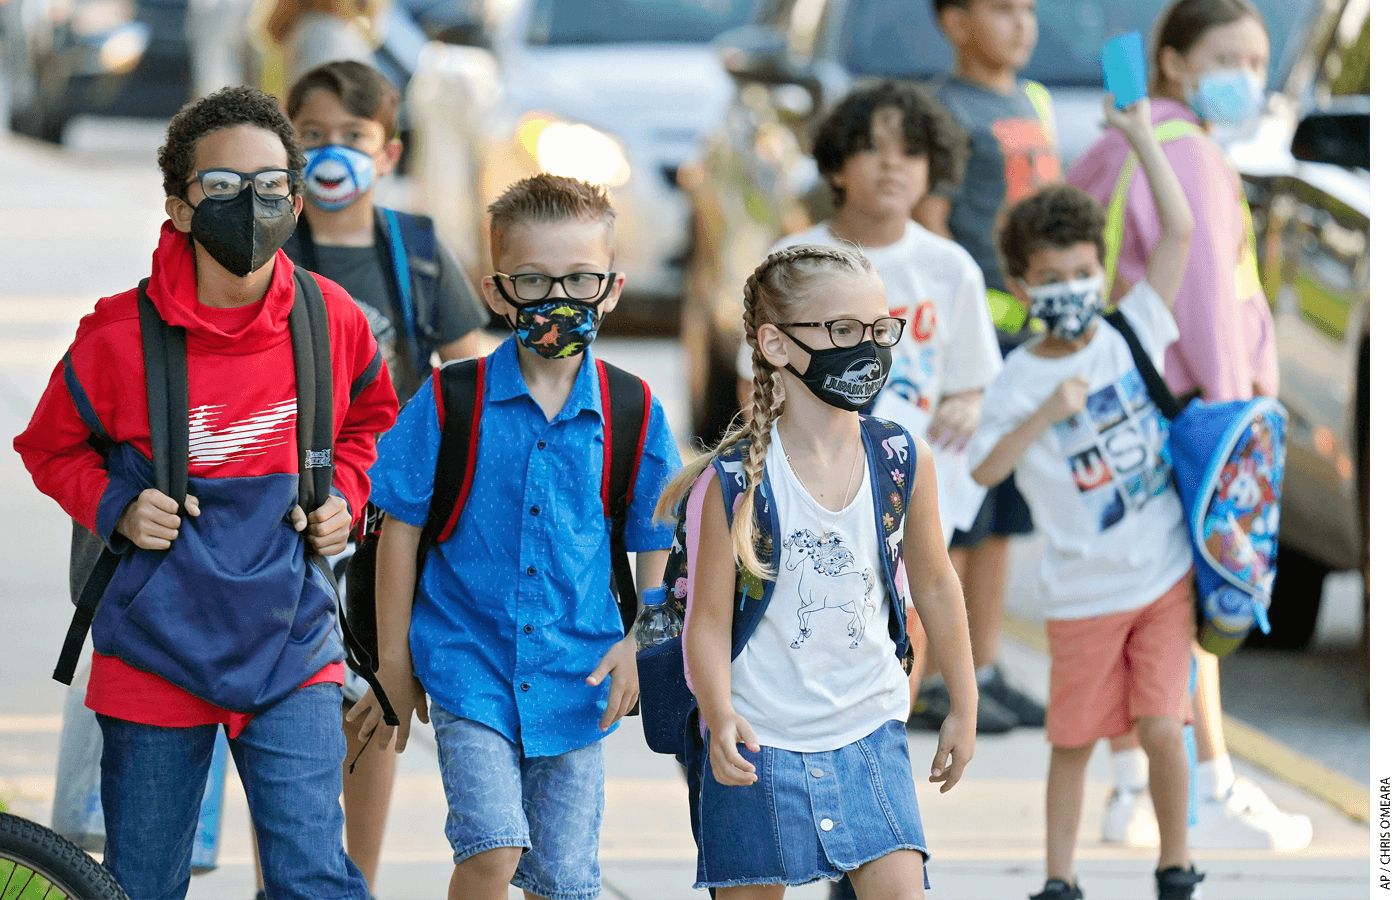 Masks may not be needed for children in communities with high vaccination and low case rates.